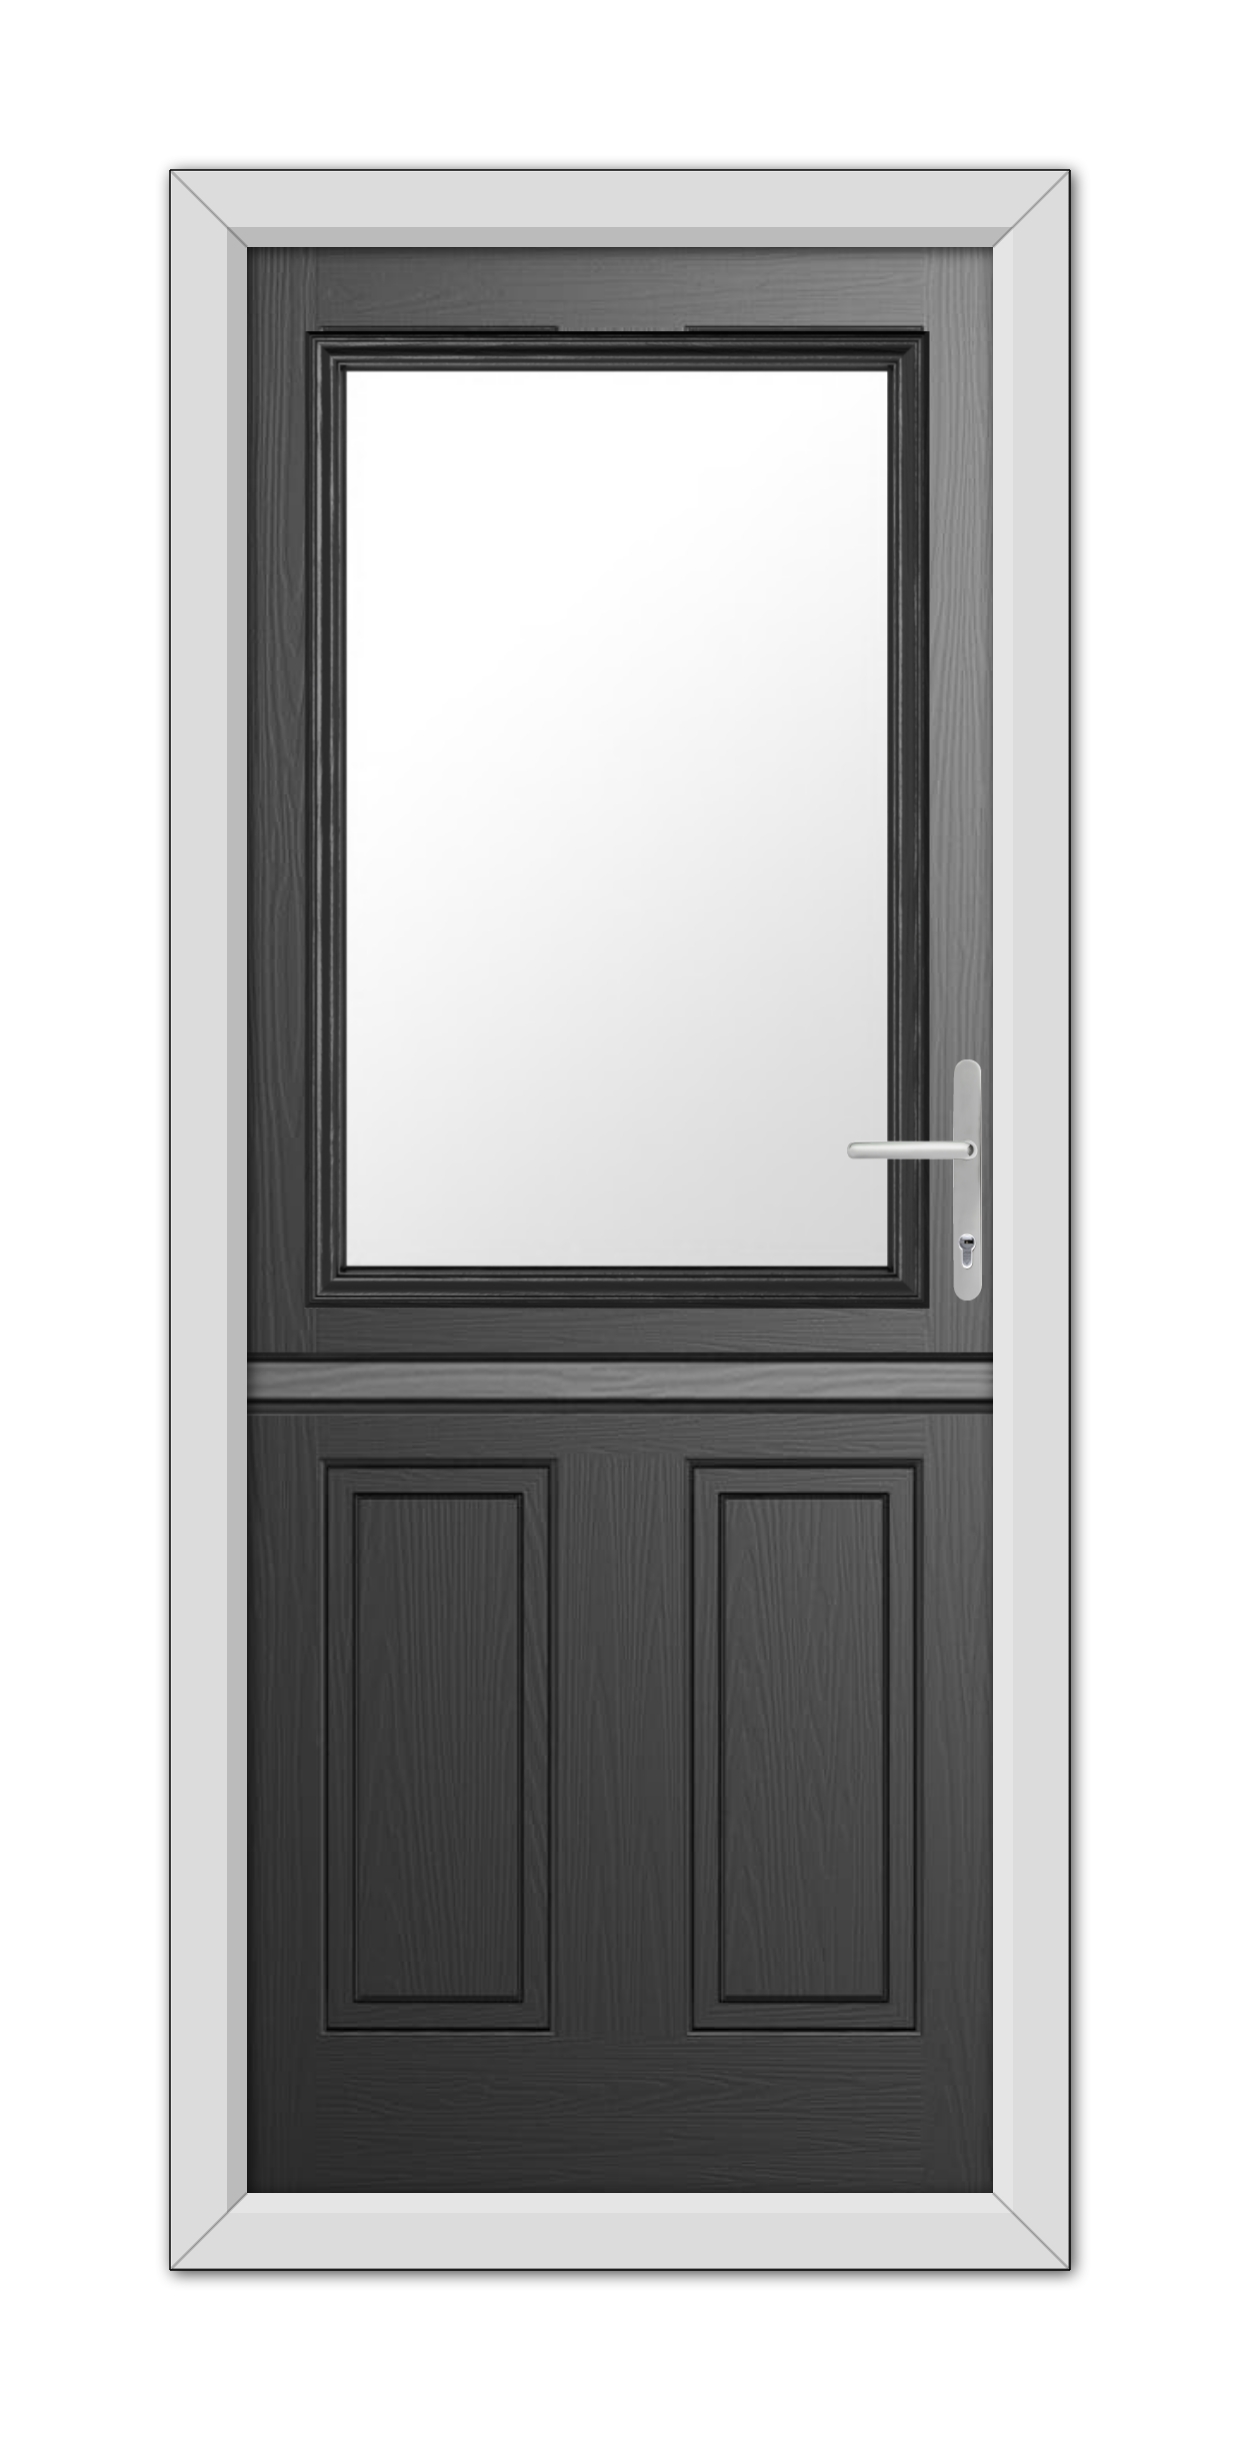 A modern Black Buxton Stable Composite Door 48mm Timber Core with a window on the upper half, set in a white frame, featuring a metal handle on the right side.